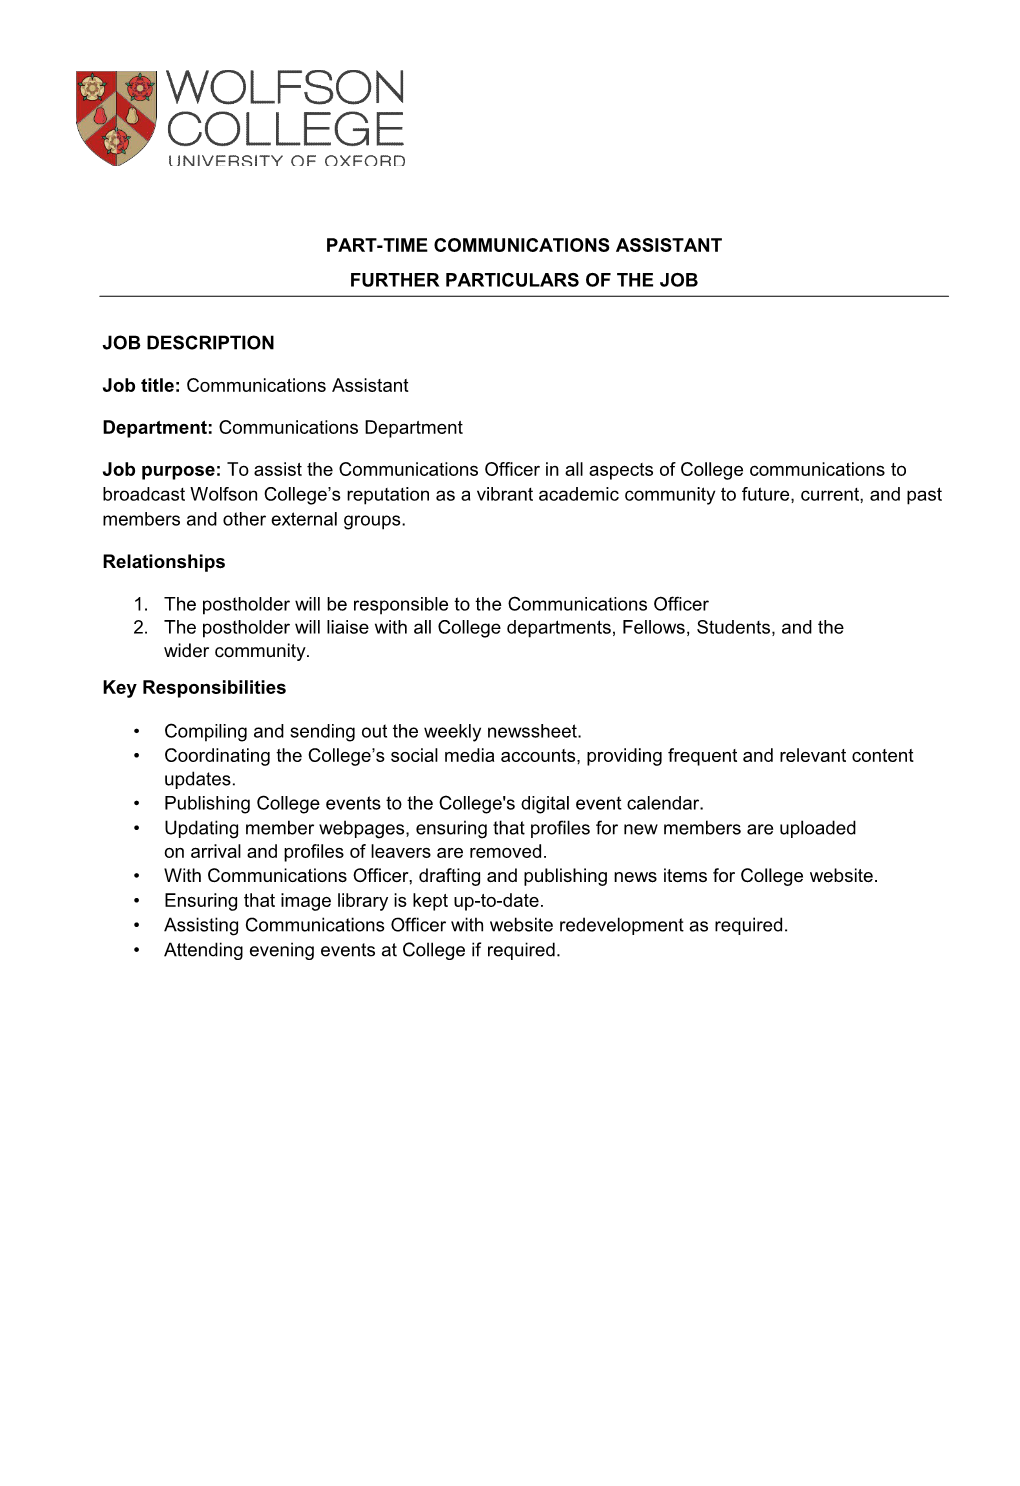 Part-Time Communications Assistant Further Particulars of the Job